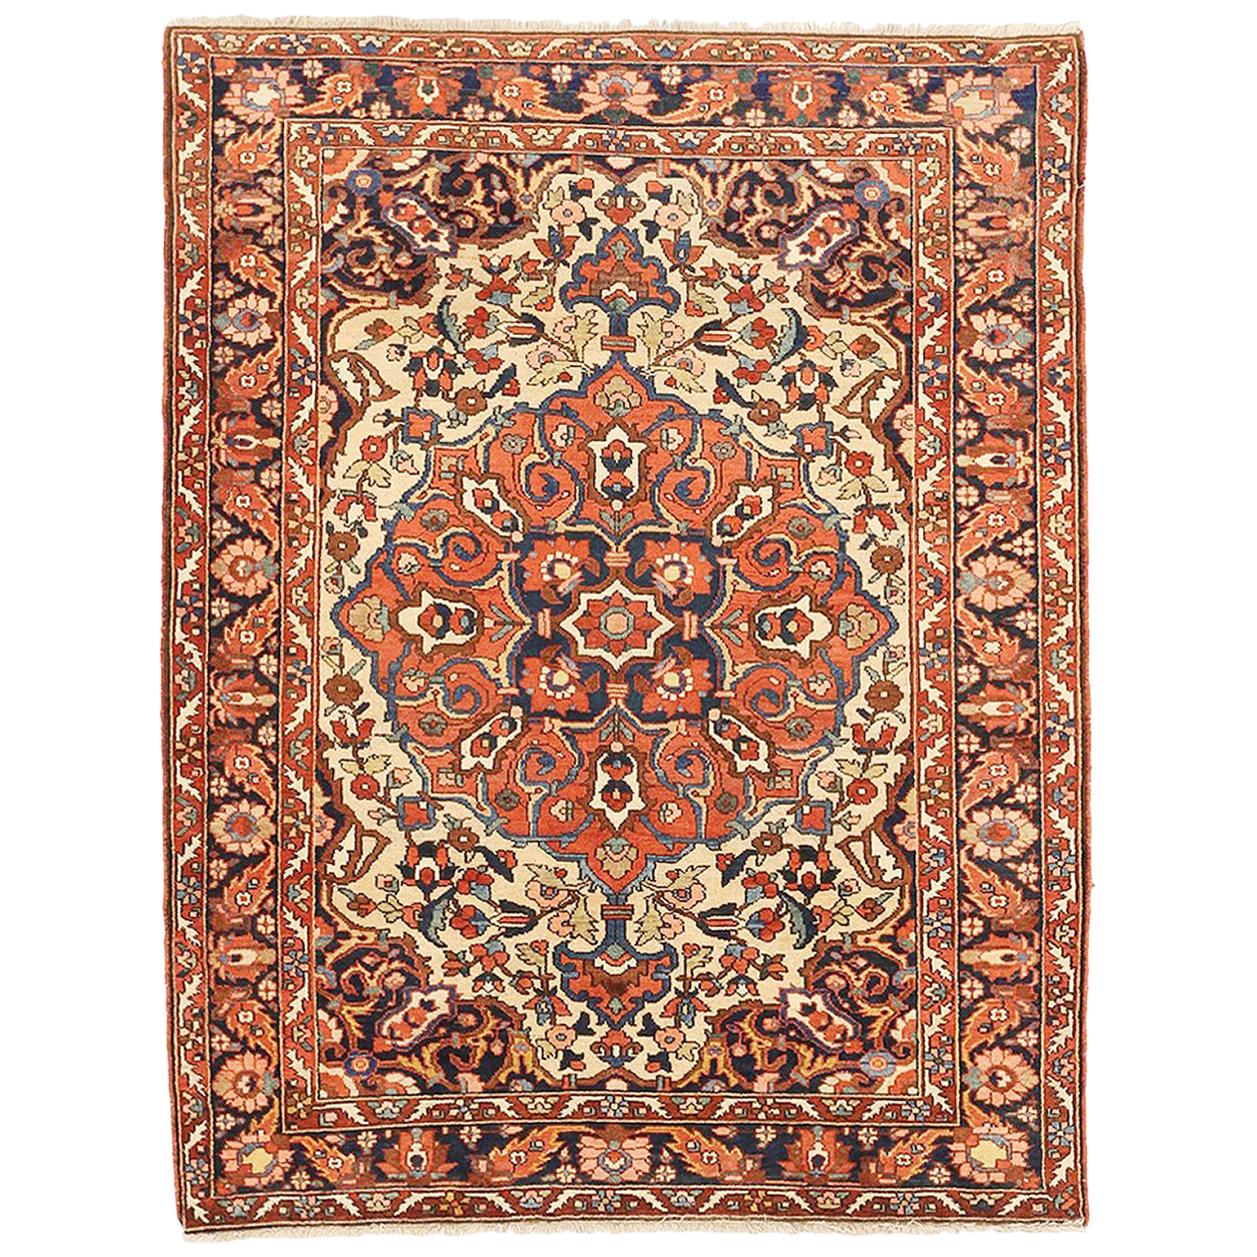 Antique Persian Bakhtiar Rug with Brown & Navy Floral Medallion at Center Field For Sale